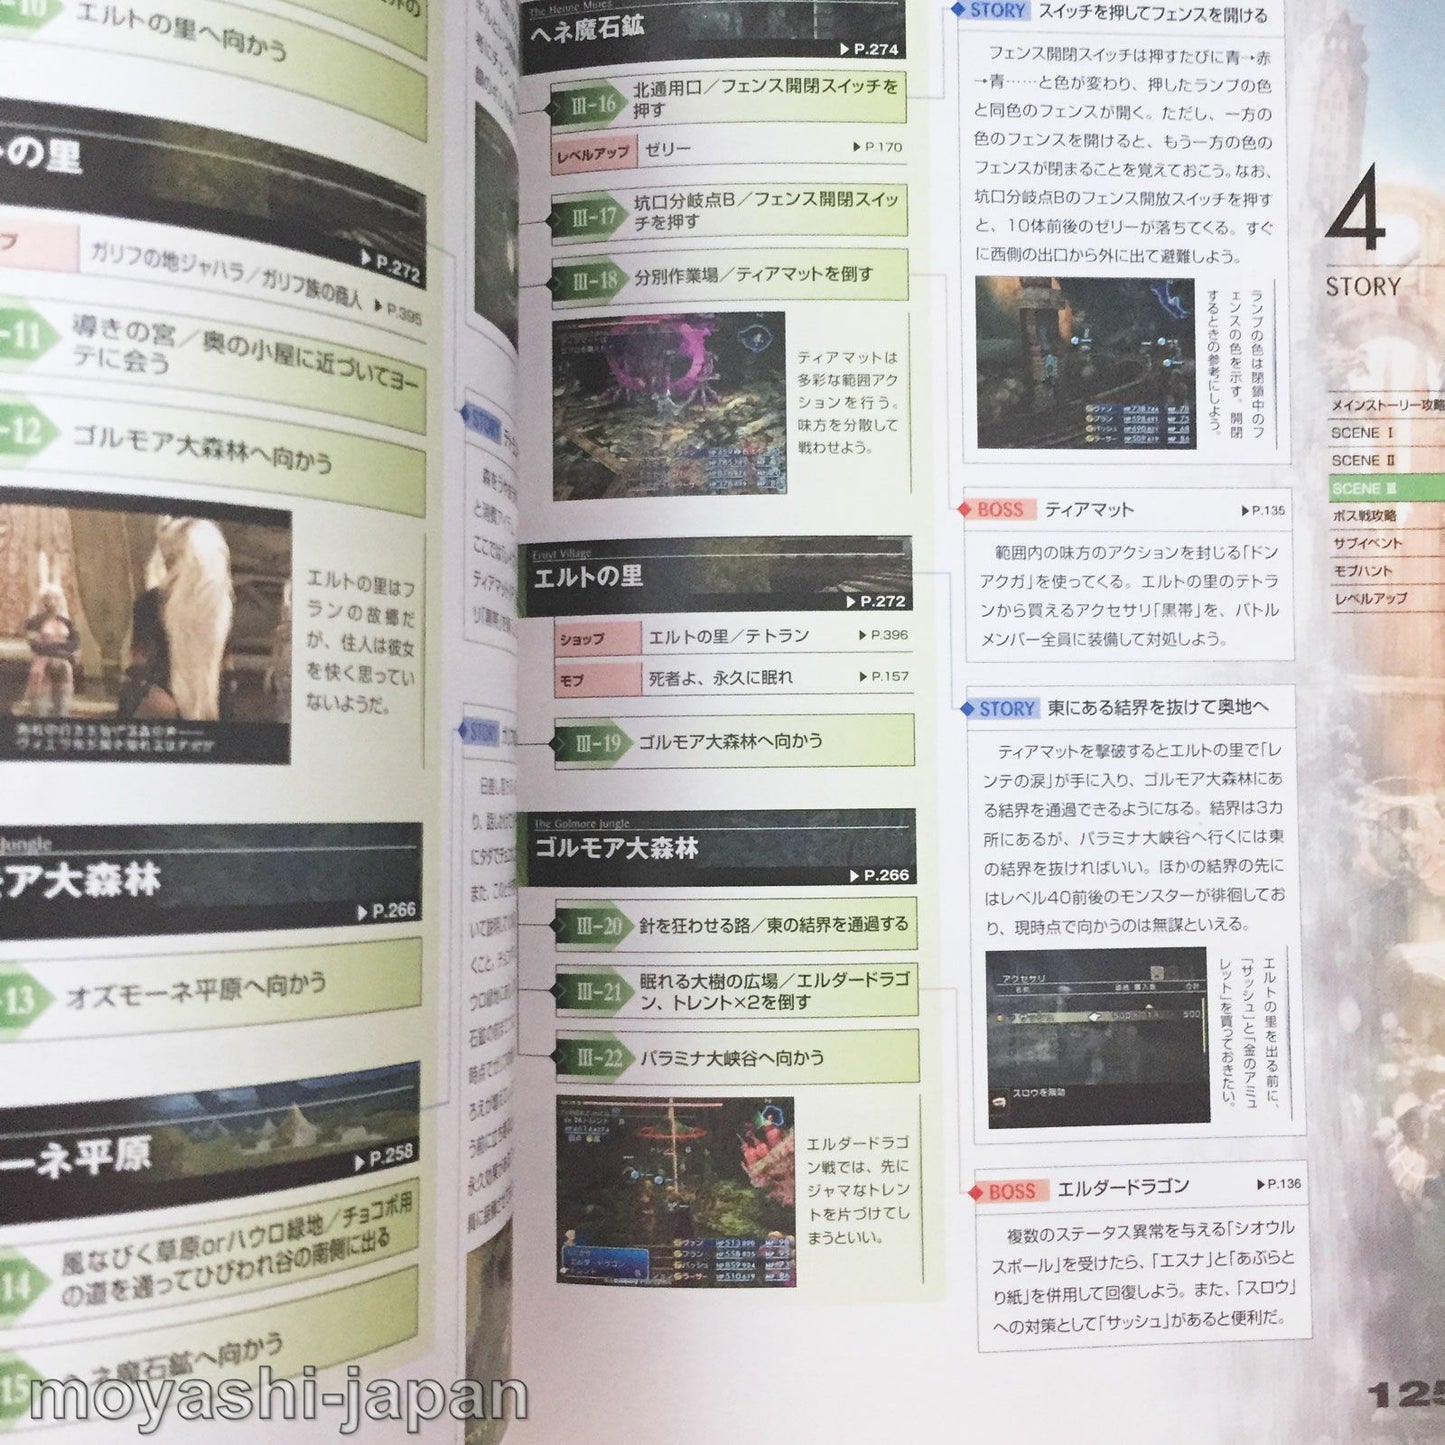 FINAL FANTASY XII 12 Official Guide Book